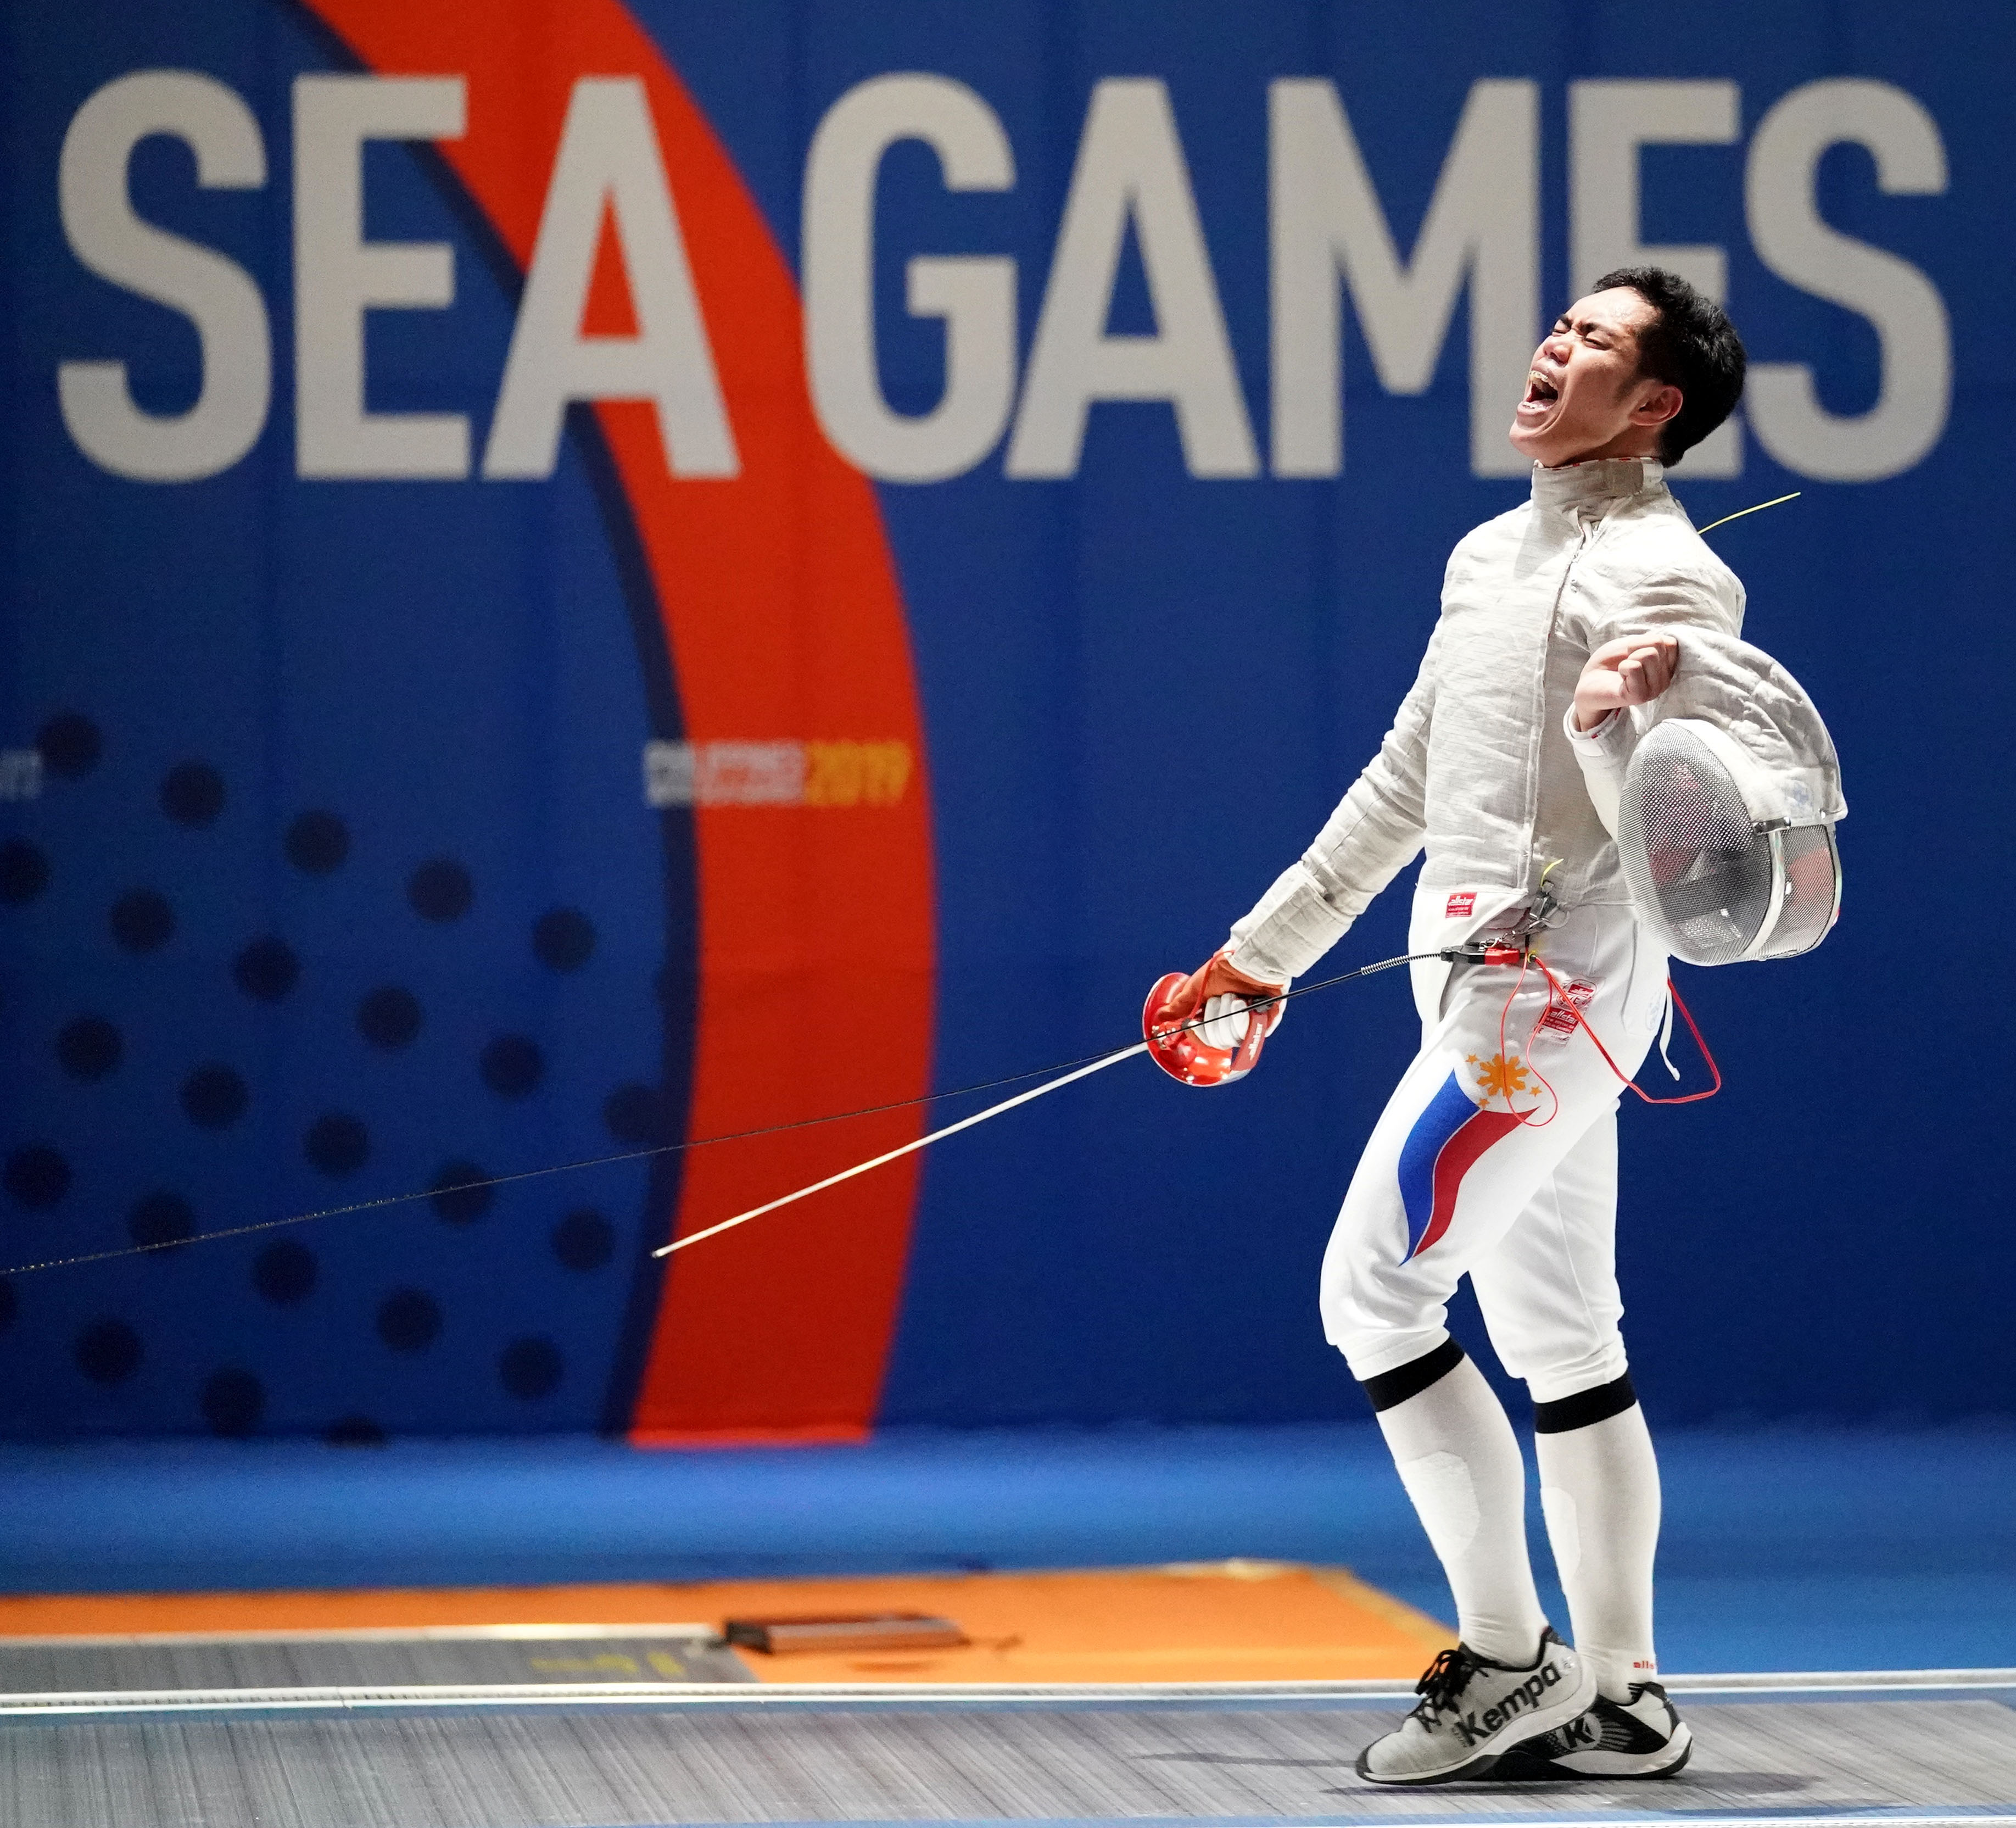 Philippines' Christian Concepcion settles for silver against Vu Than An of Vietnam in the men's fencing individual sabre in the 2019 SEA Games at the World Trade Center. INQUIRER PHOTO/AUGUST DELA CRUZ